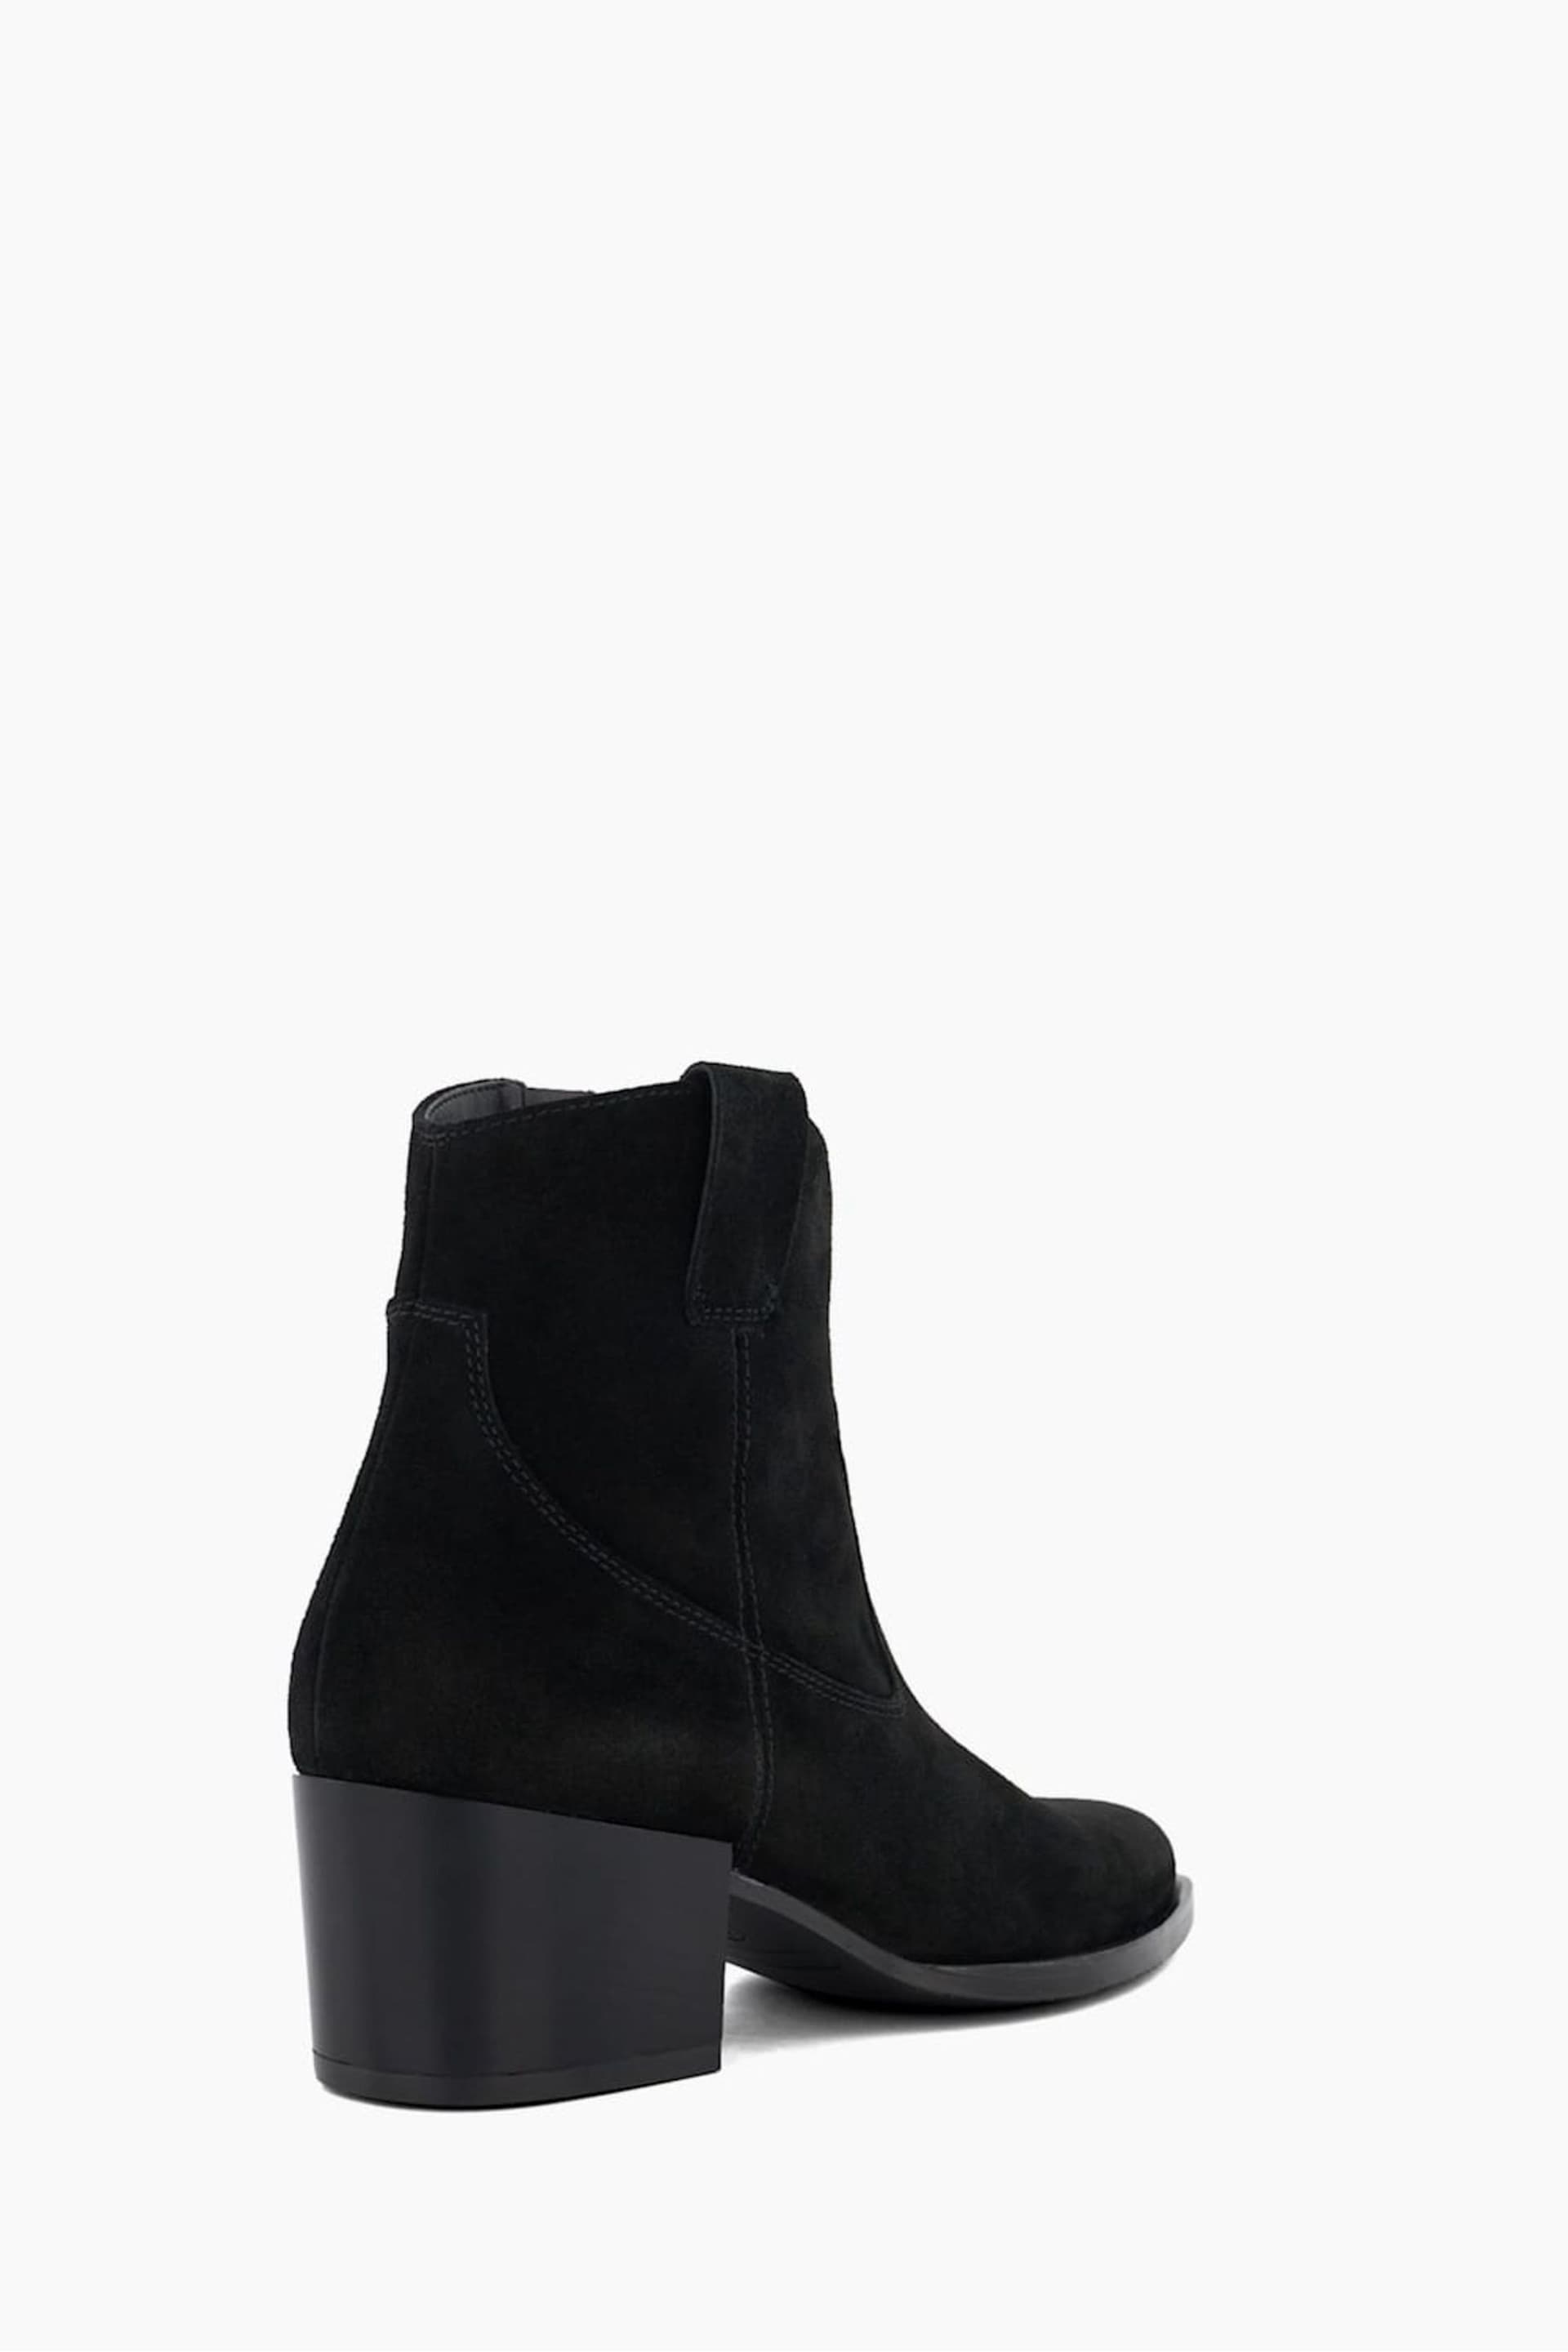 Dune London Black Possible Western Low Boots - Image 3 of 5